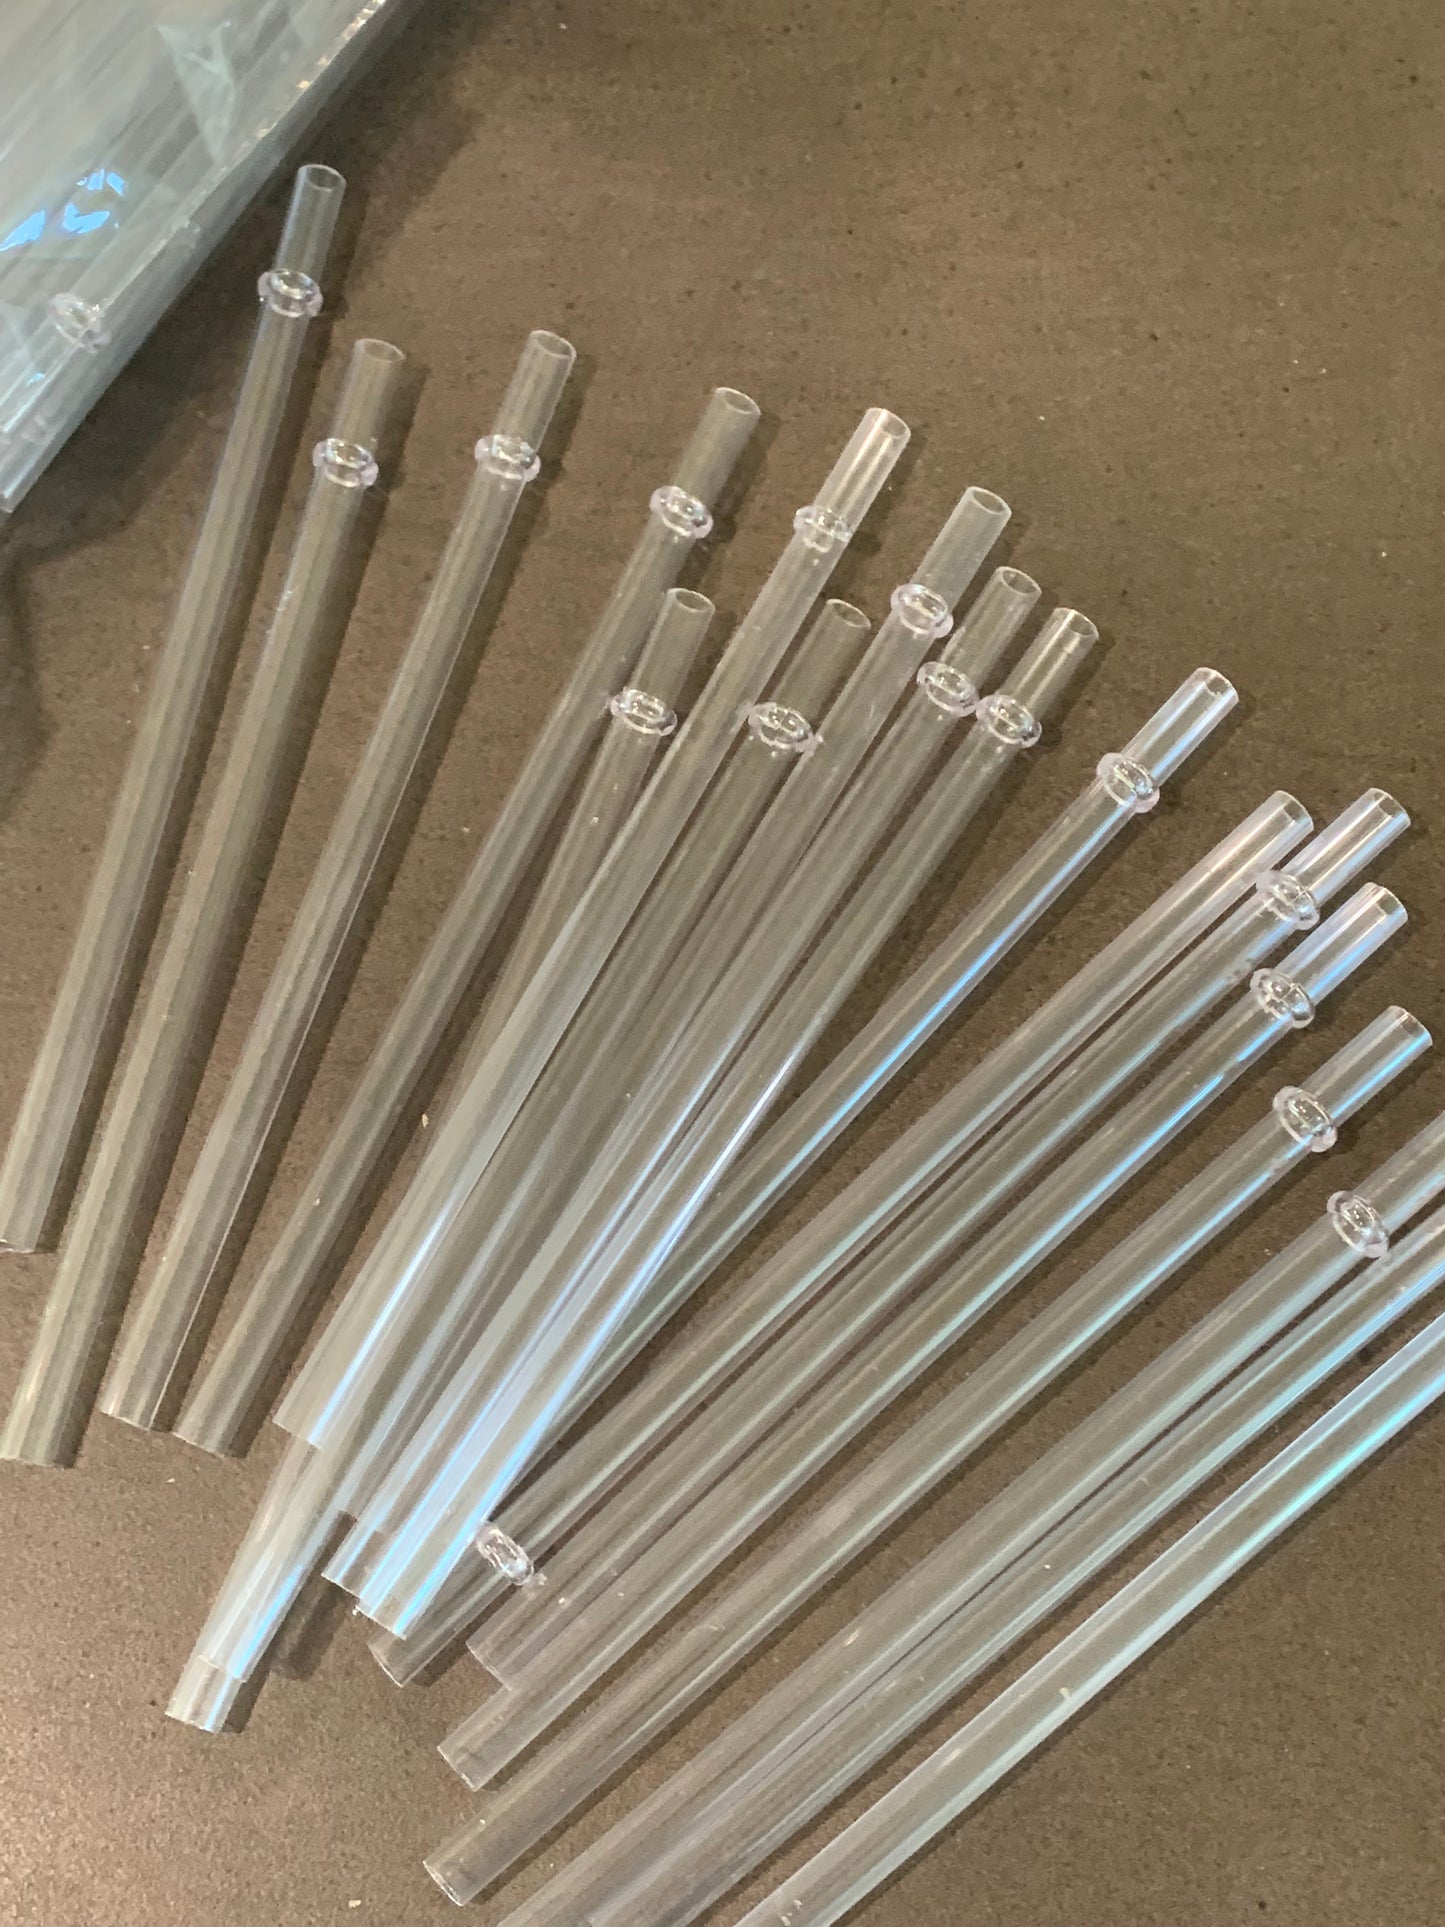 Plastic Straw  ( 1 piece) not packaged